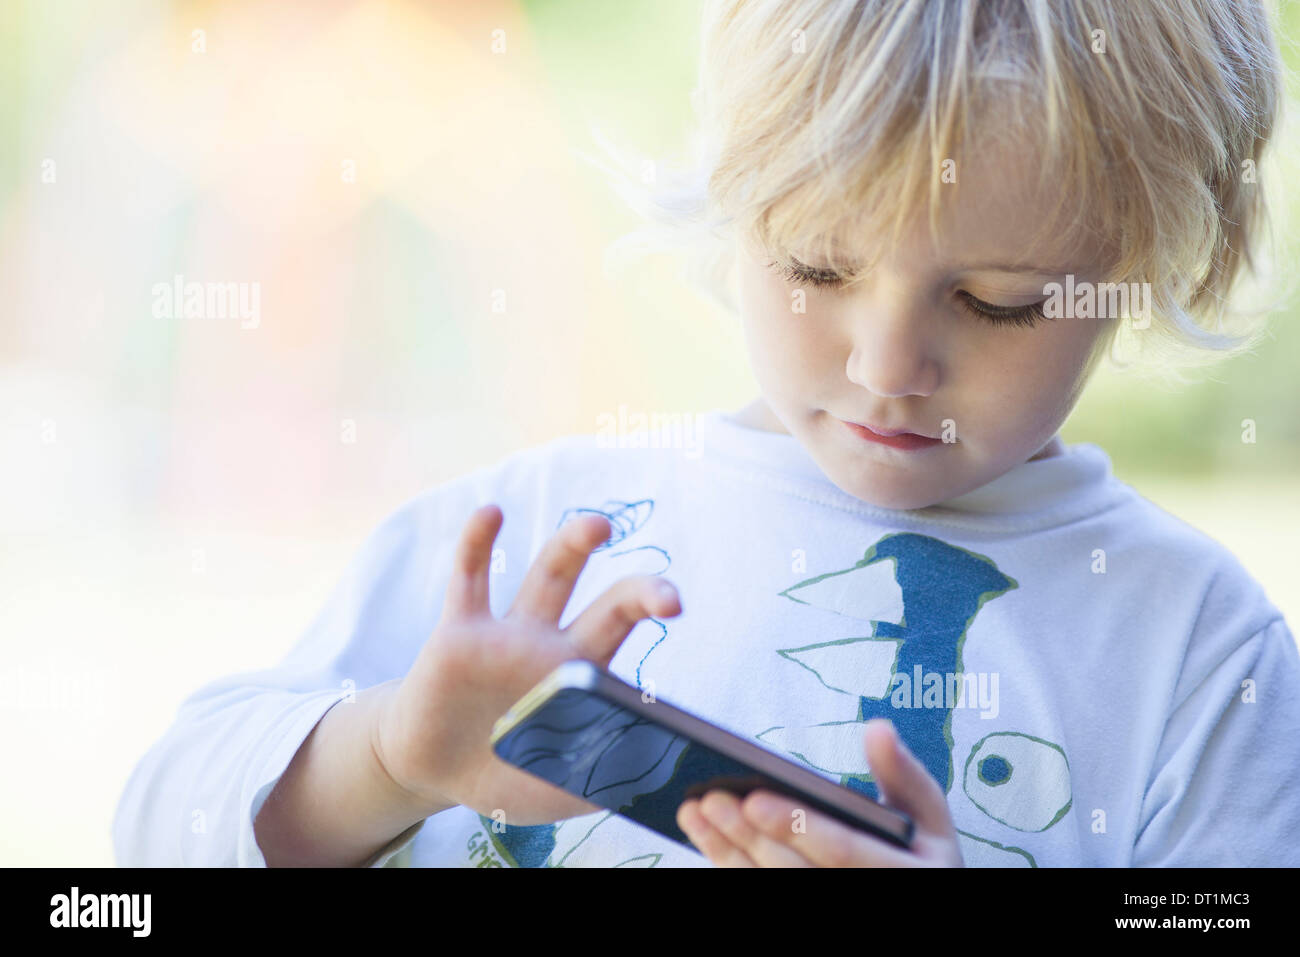 Little boy playing with smartphone Banque D'Images